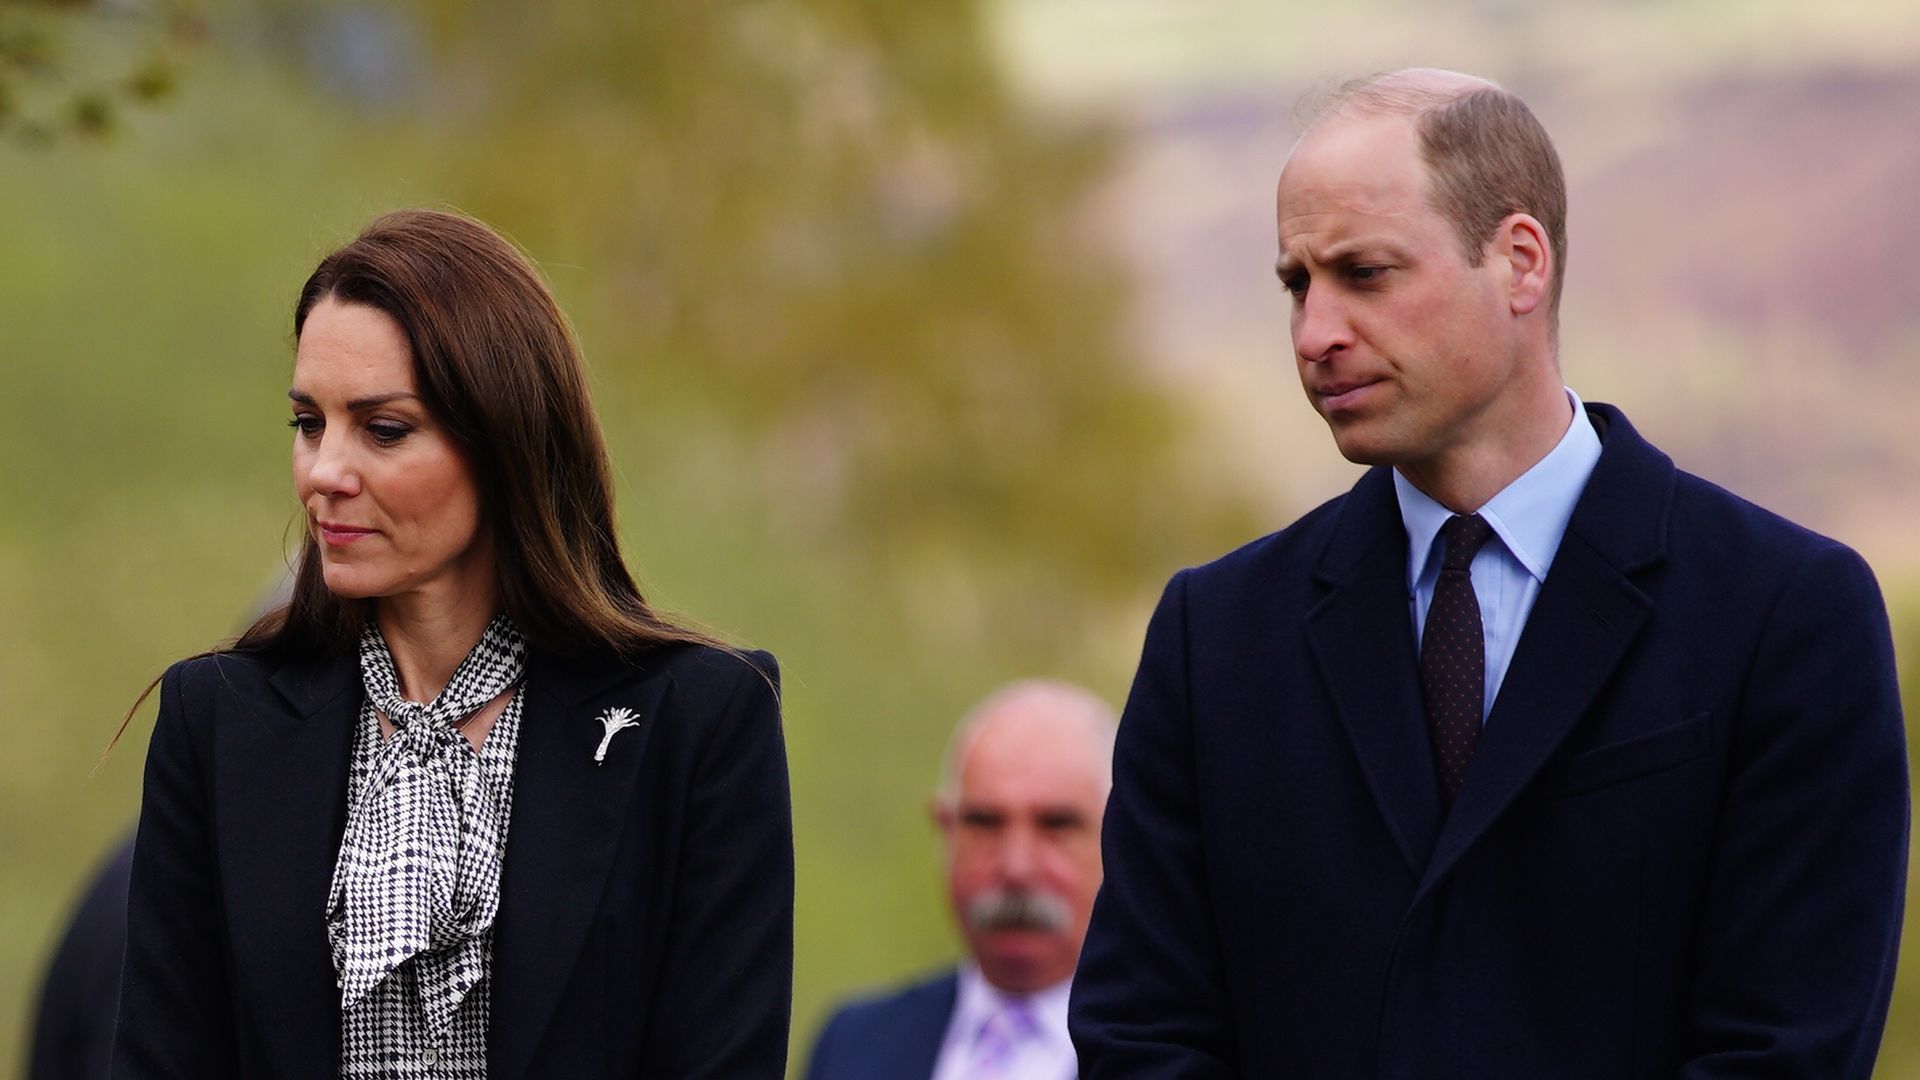 William and Kate pay their respects at Aberfan Memorial Garden